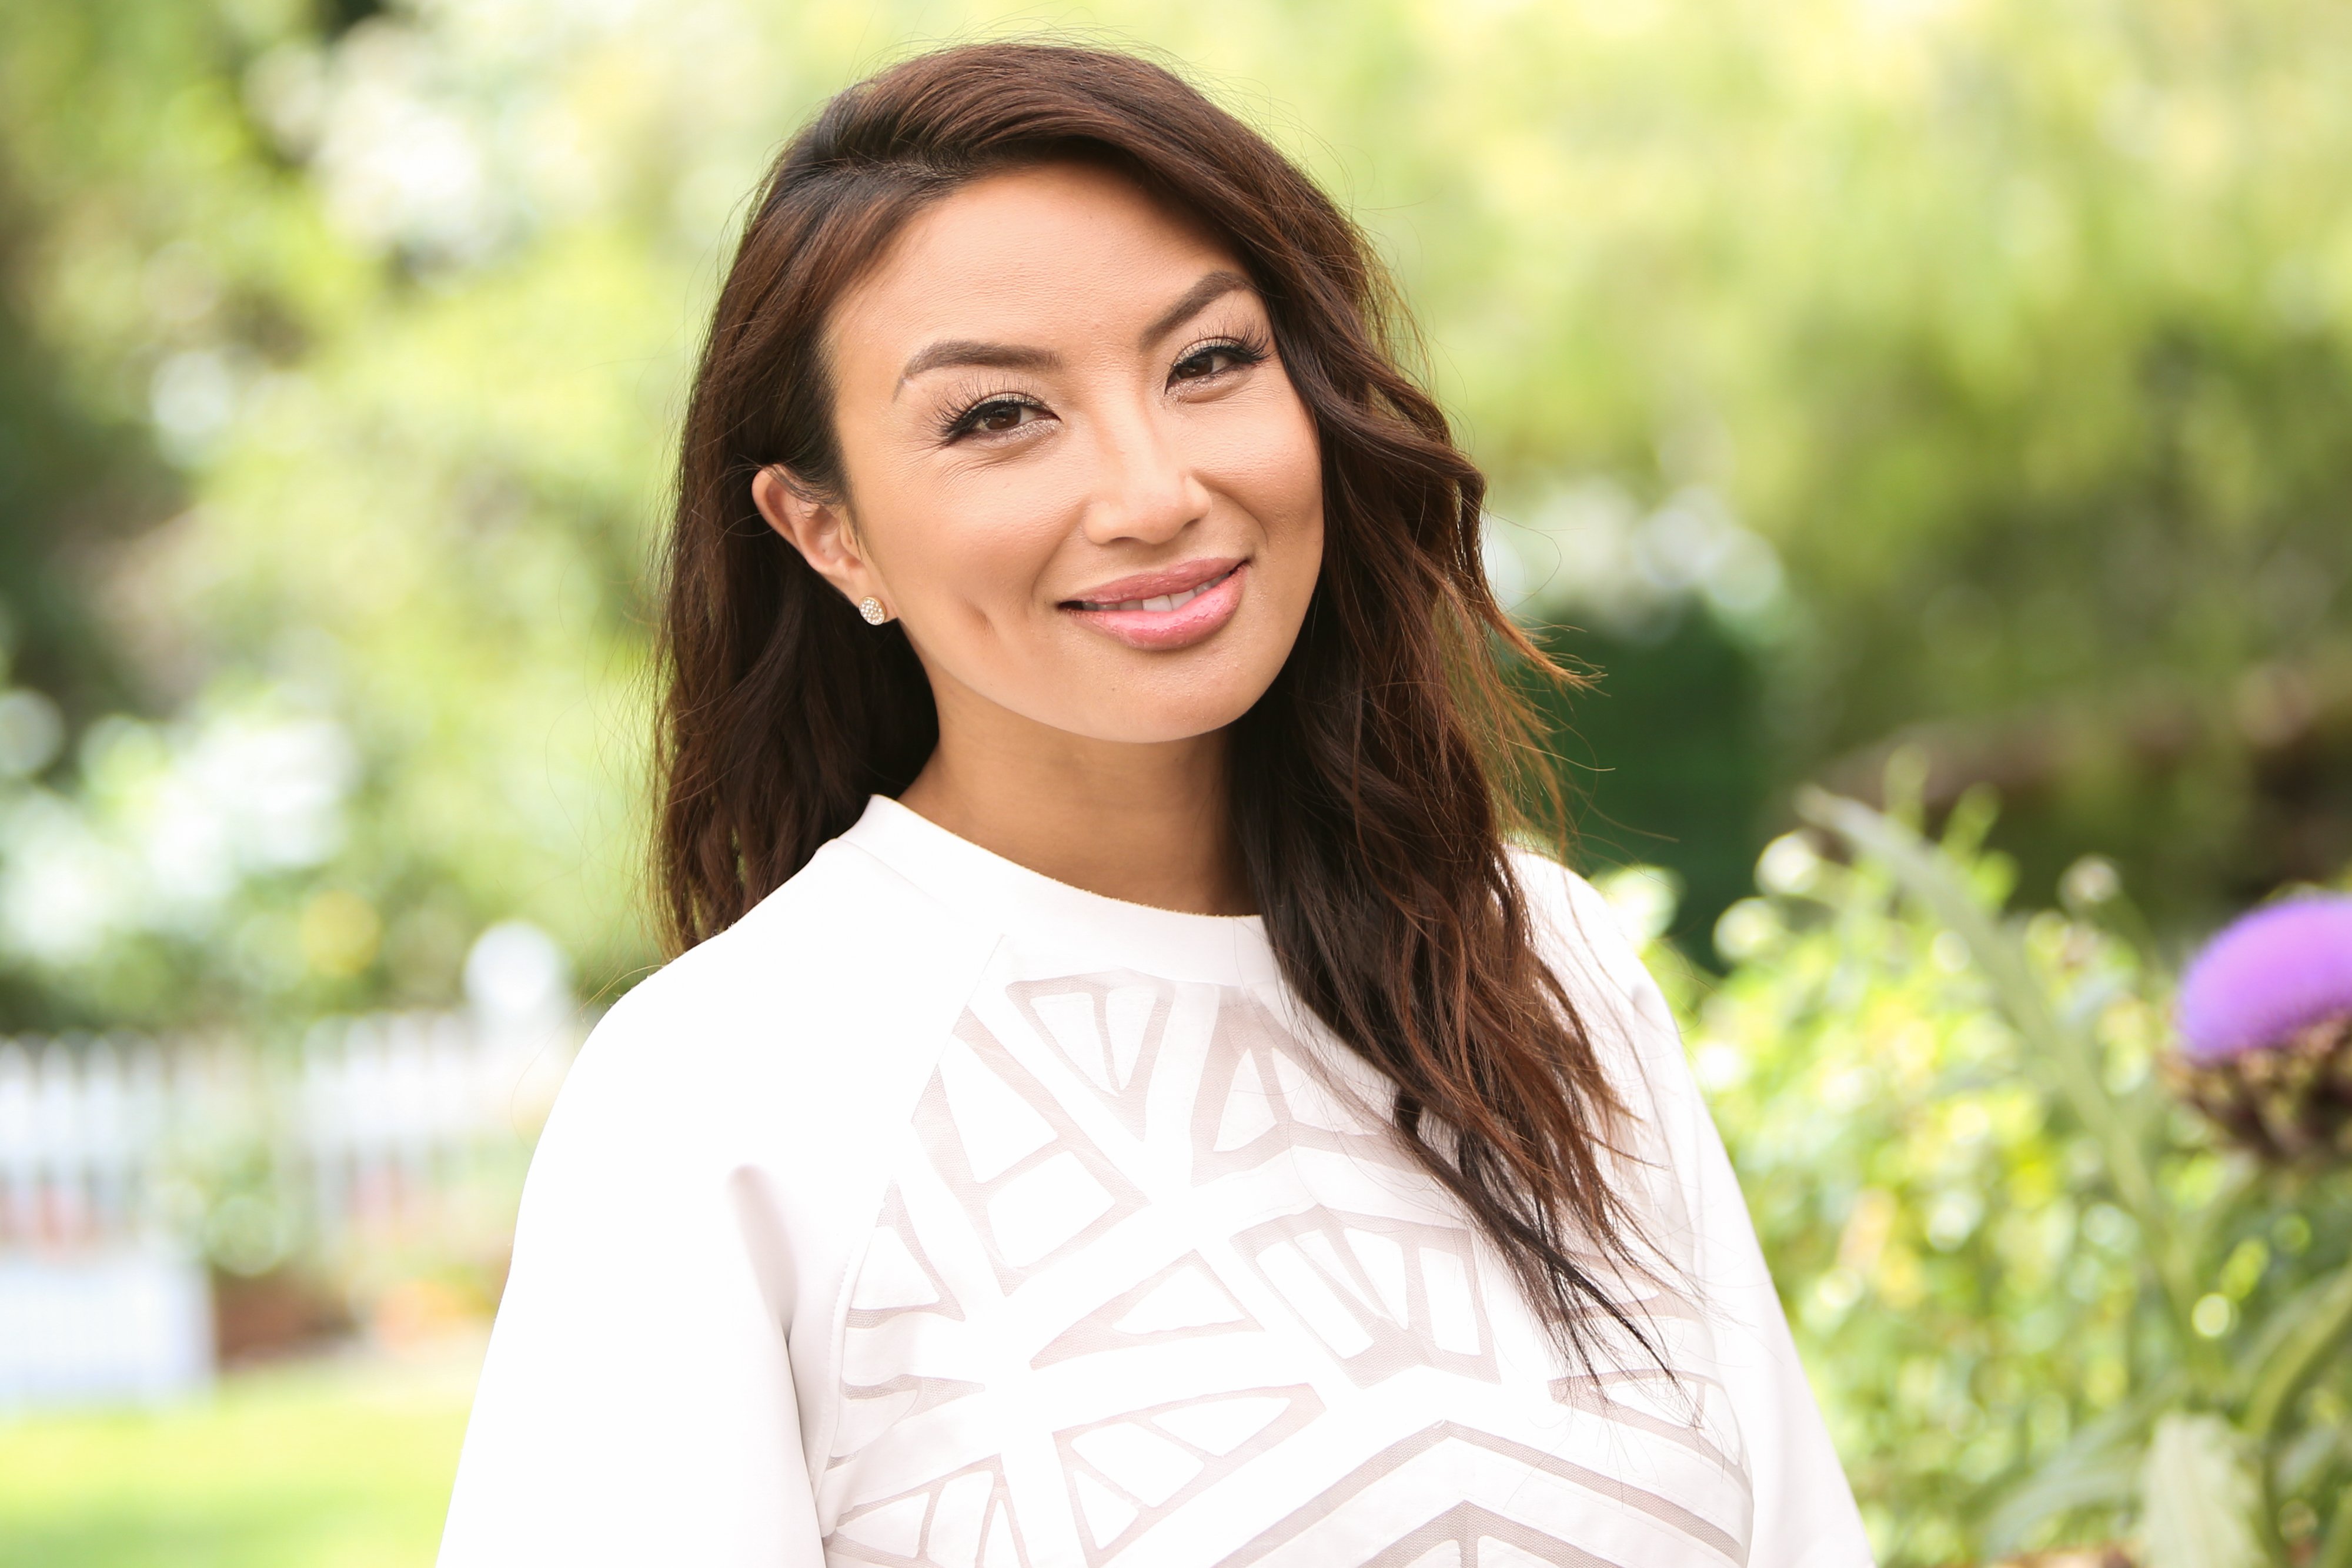 Jeannie Mai visits Hallmark's "Home & Family" at Universal Studios Hollywood on June 11, 2019 | Photo: GettyImages